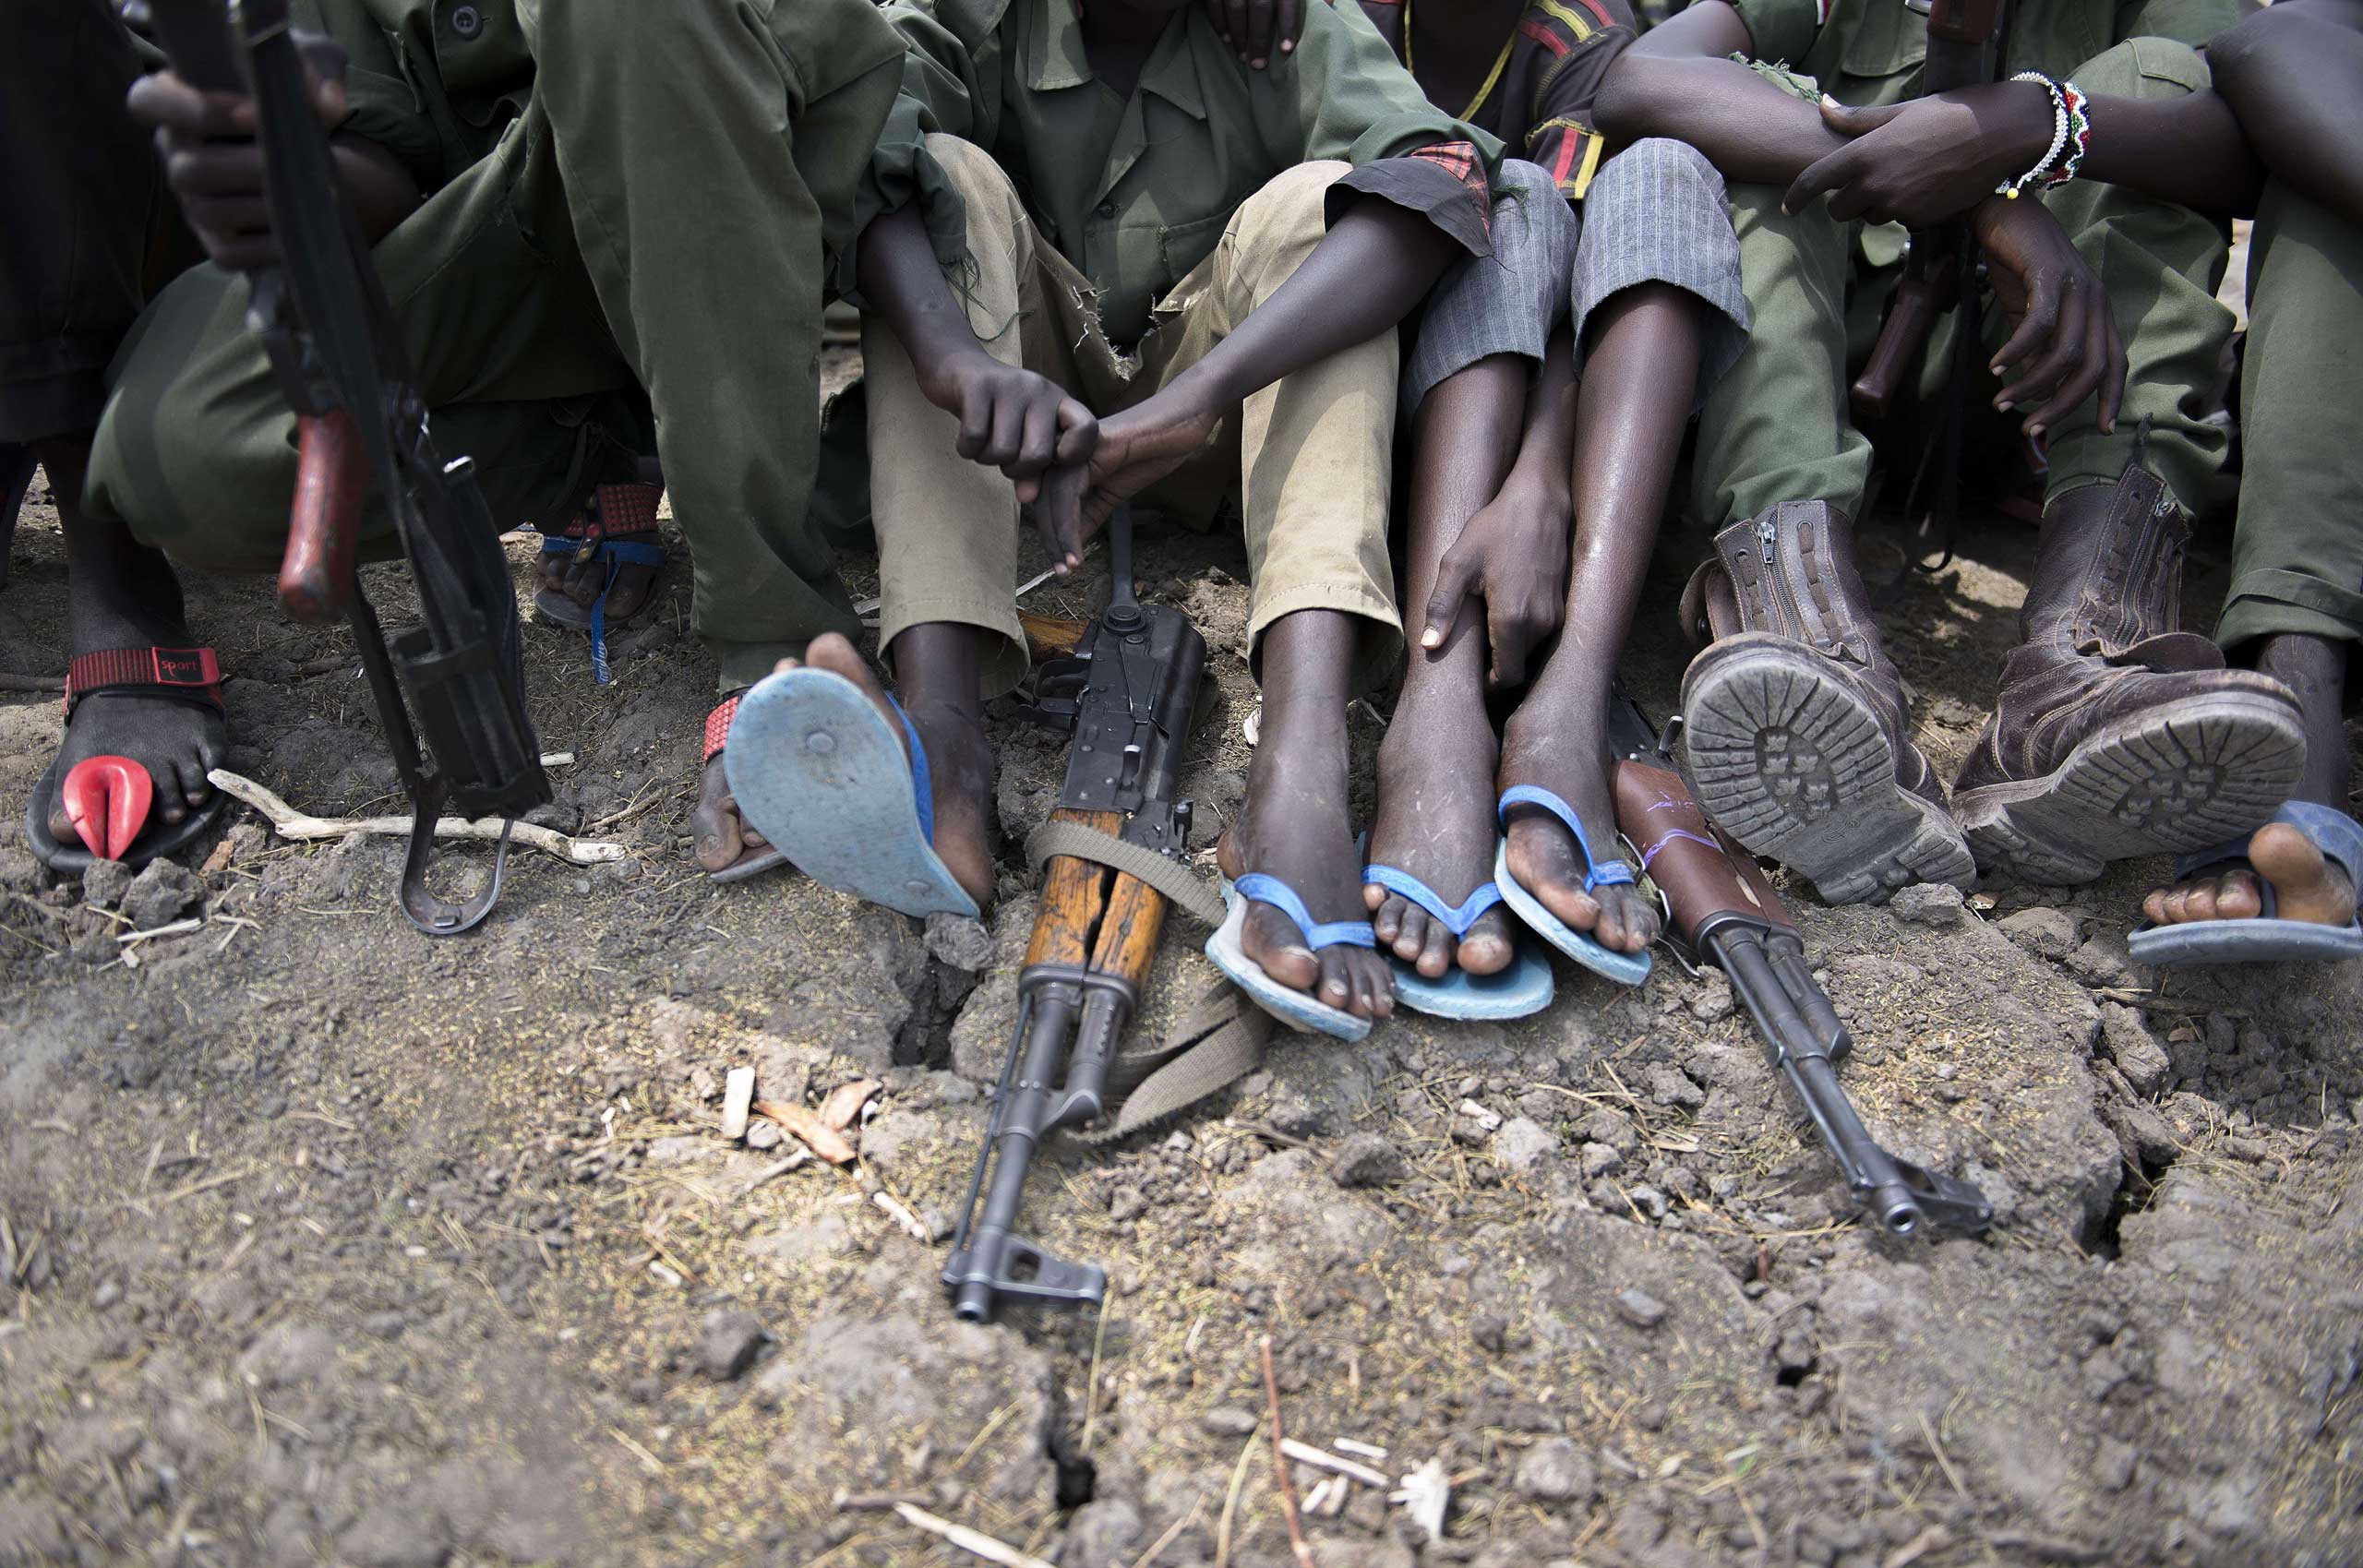 Feb.10, 2015. Child soldiers in Pibor, Jonglei State in South Sudan, surrender their weapons and uniforms in a ceremony overseen by UNICEF, the South Sudan National Disarmament, Demobilization and Reintegration Commission, and the South Sudan Democratic Army Cobra Faction.